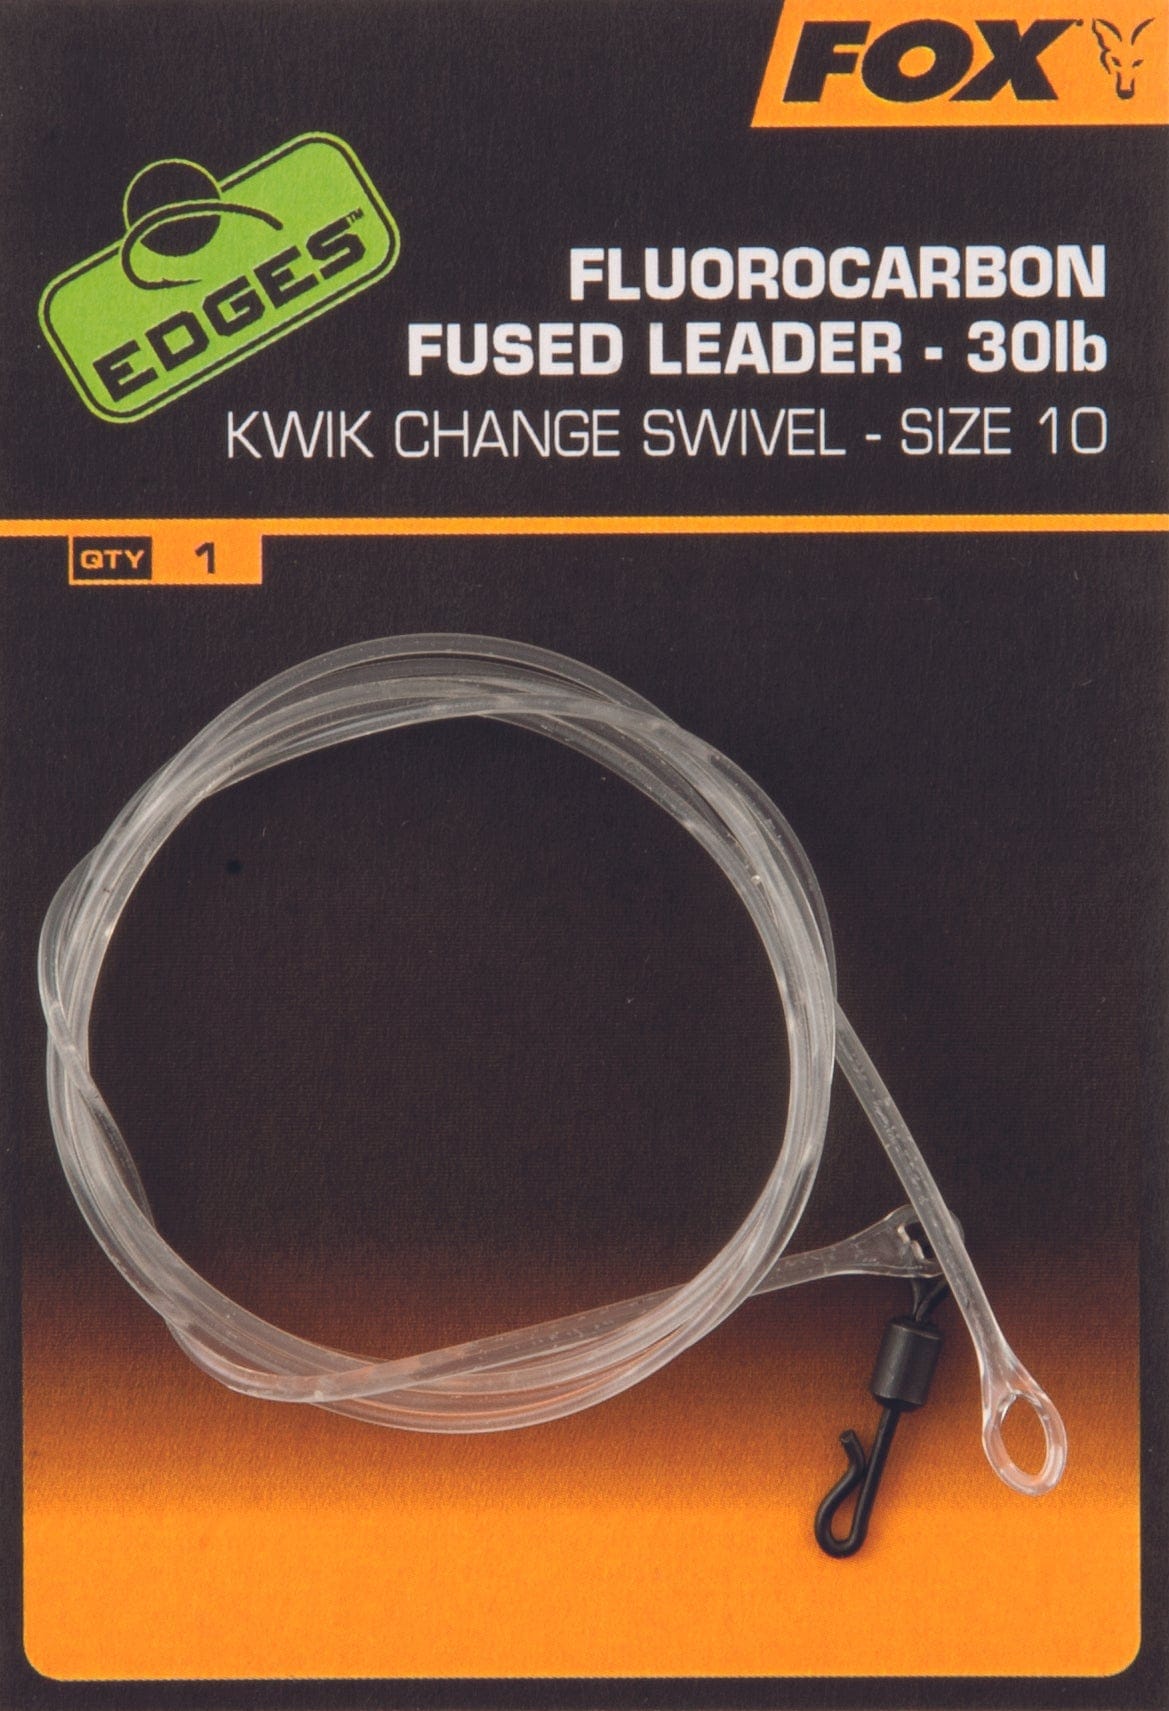 FOX Fluorocarbon Fused Leader Multi Purpose - Rods and Lines